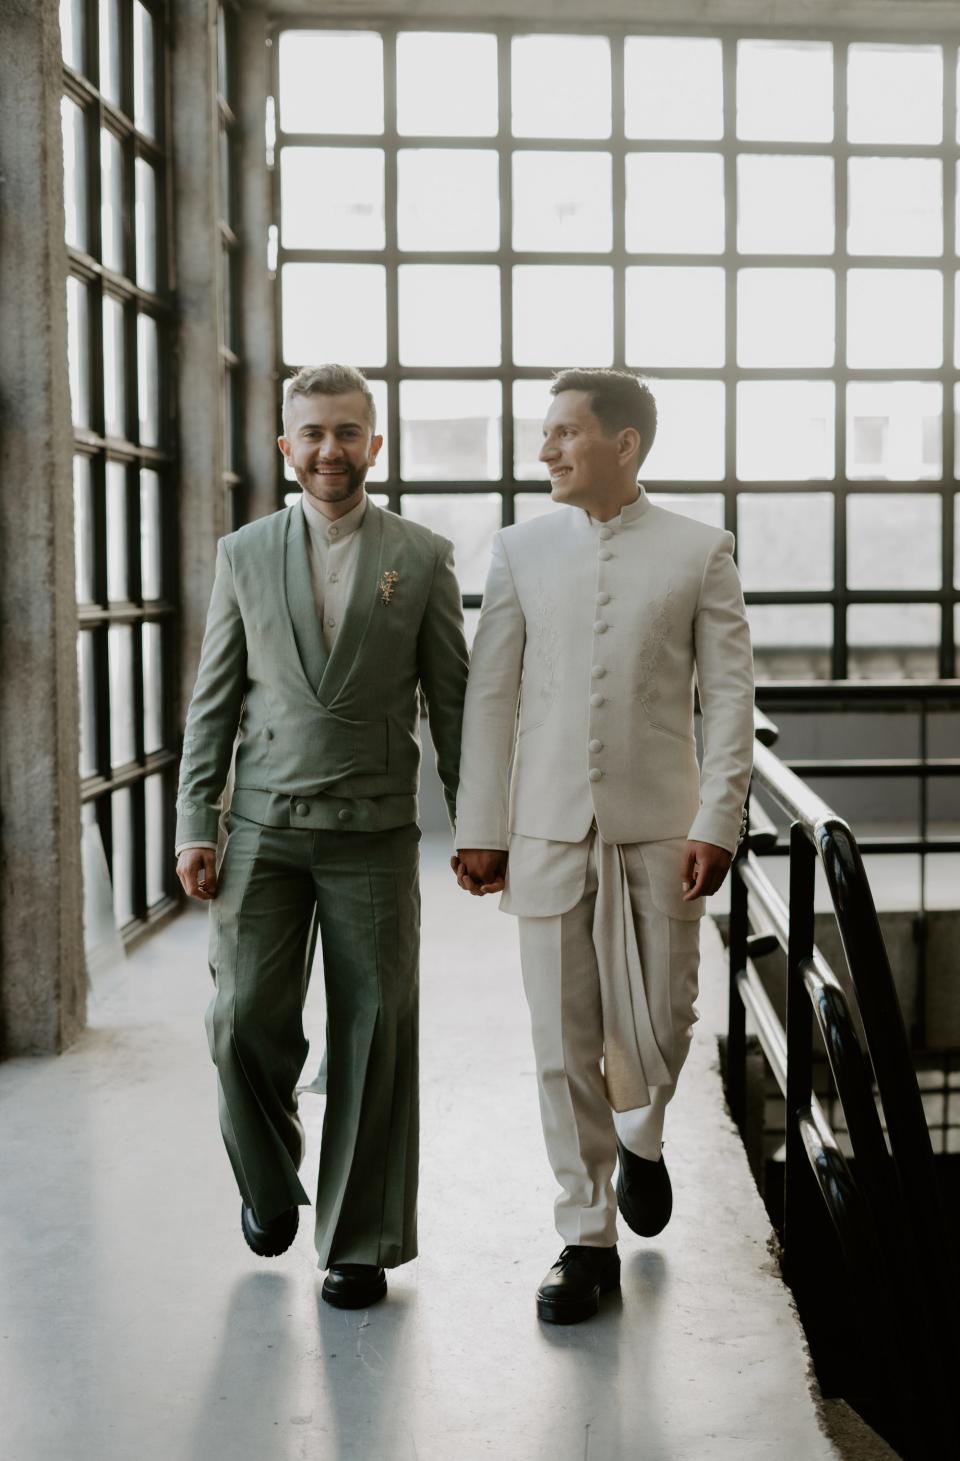 Two grooms hold hands as they walk through a room full of windows.